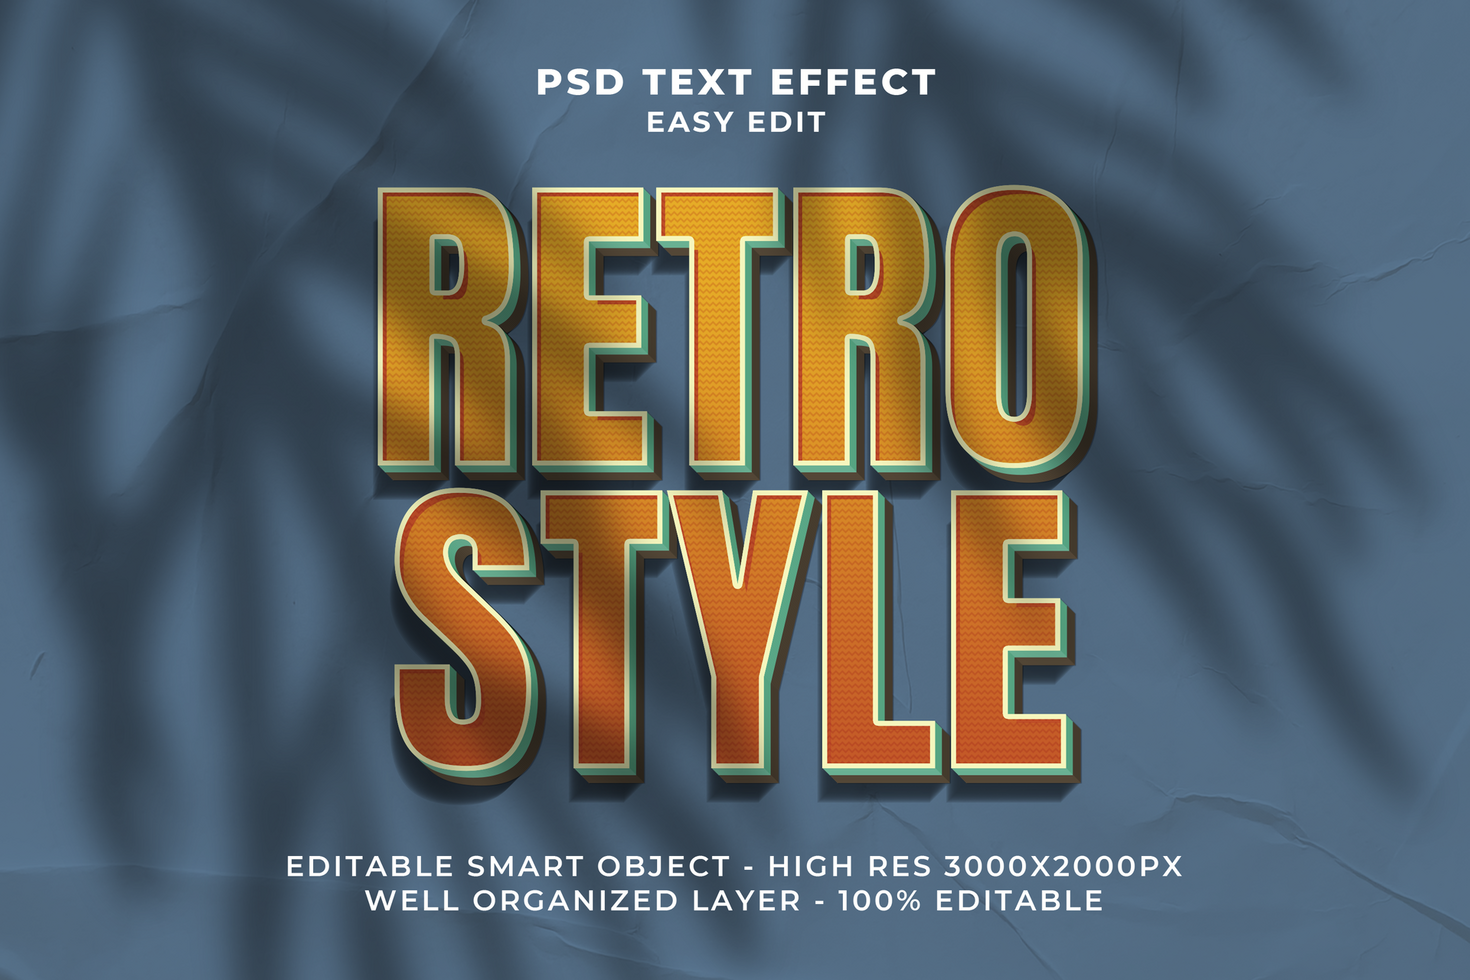 Retro style text effect psd